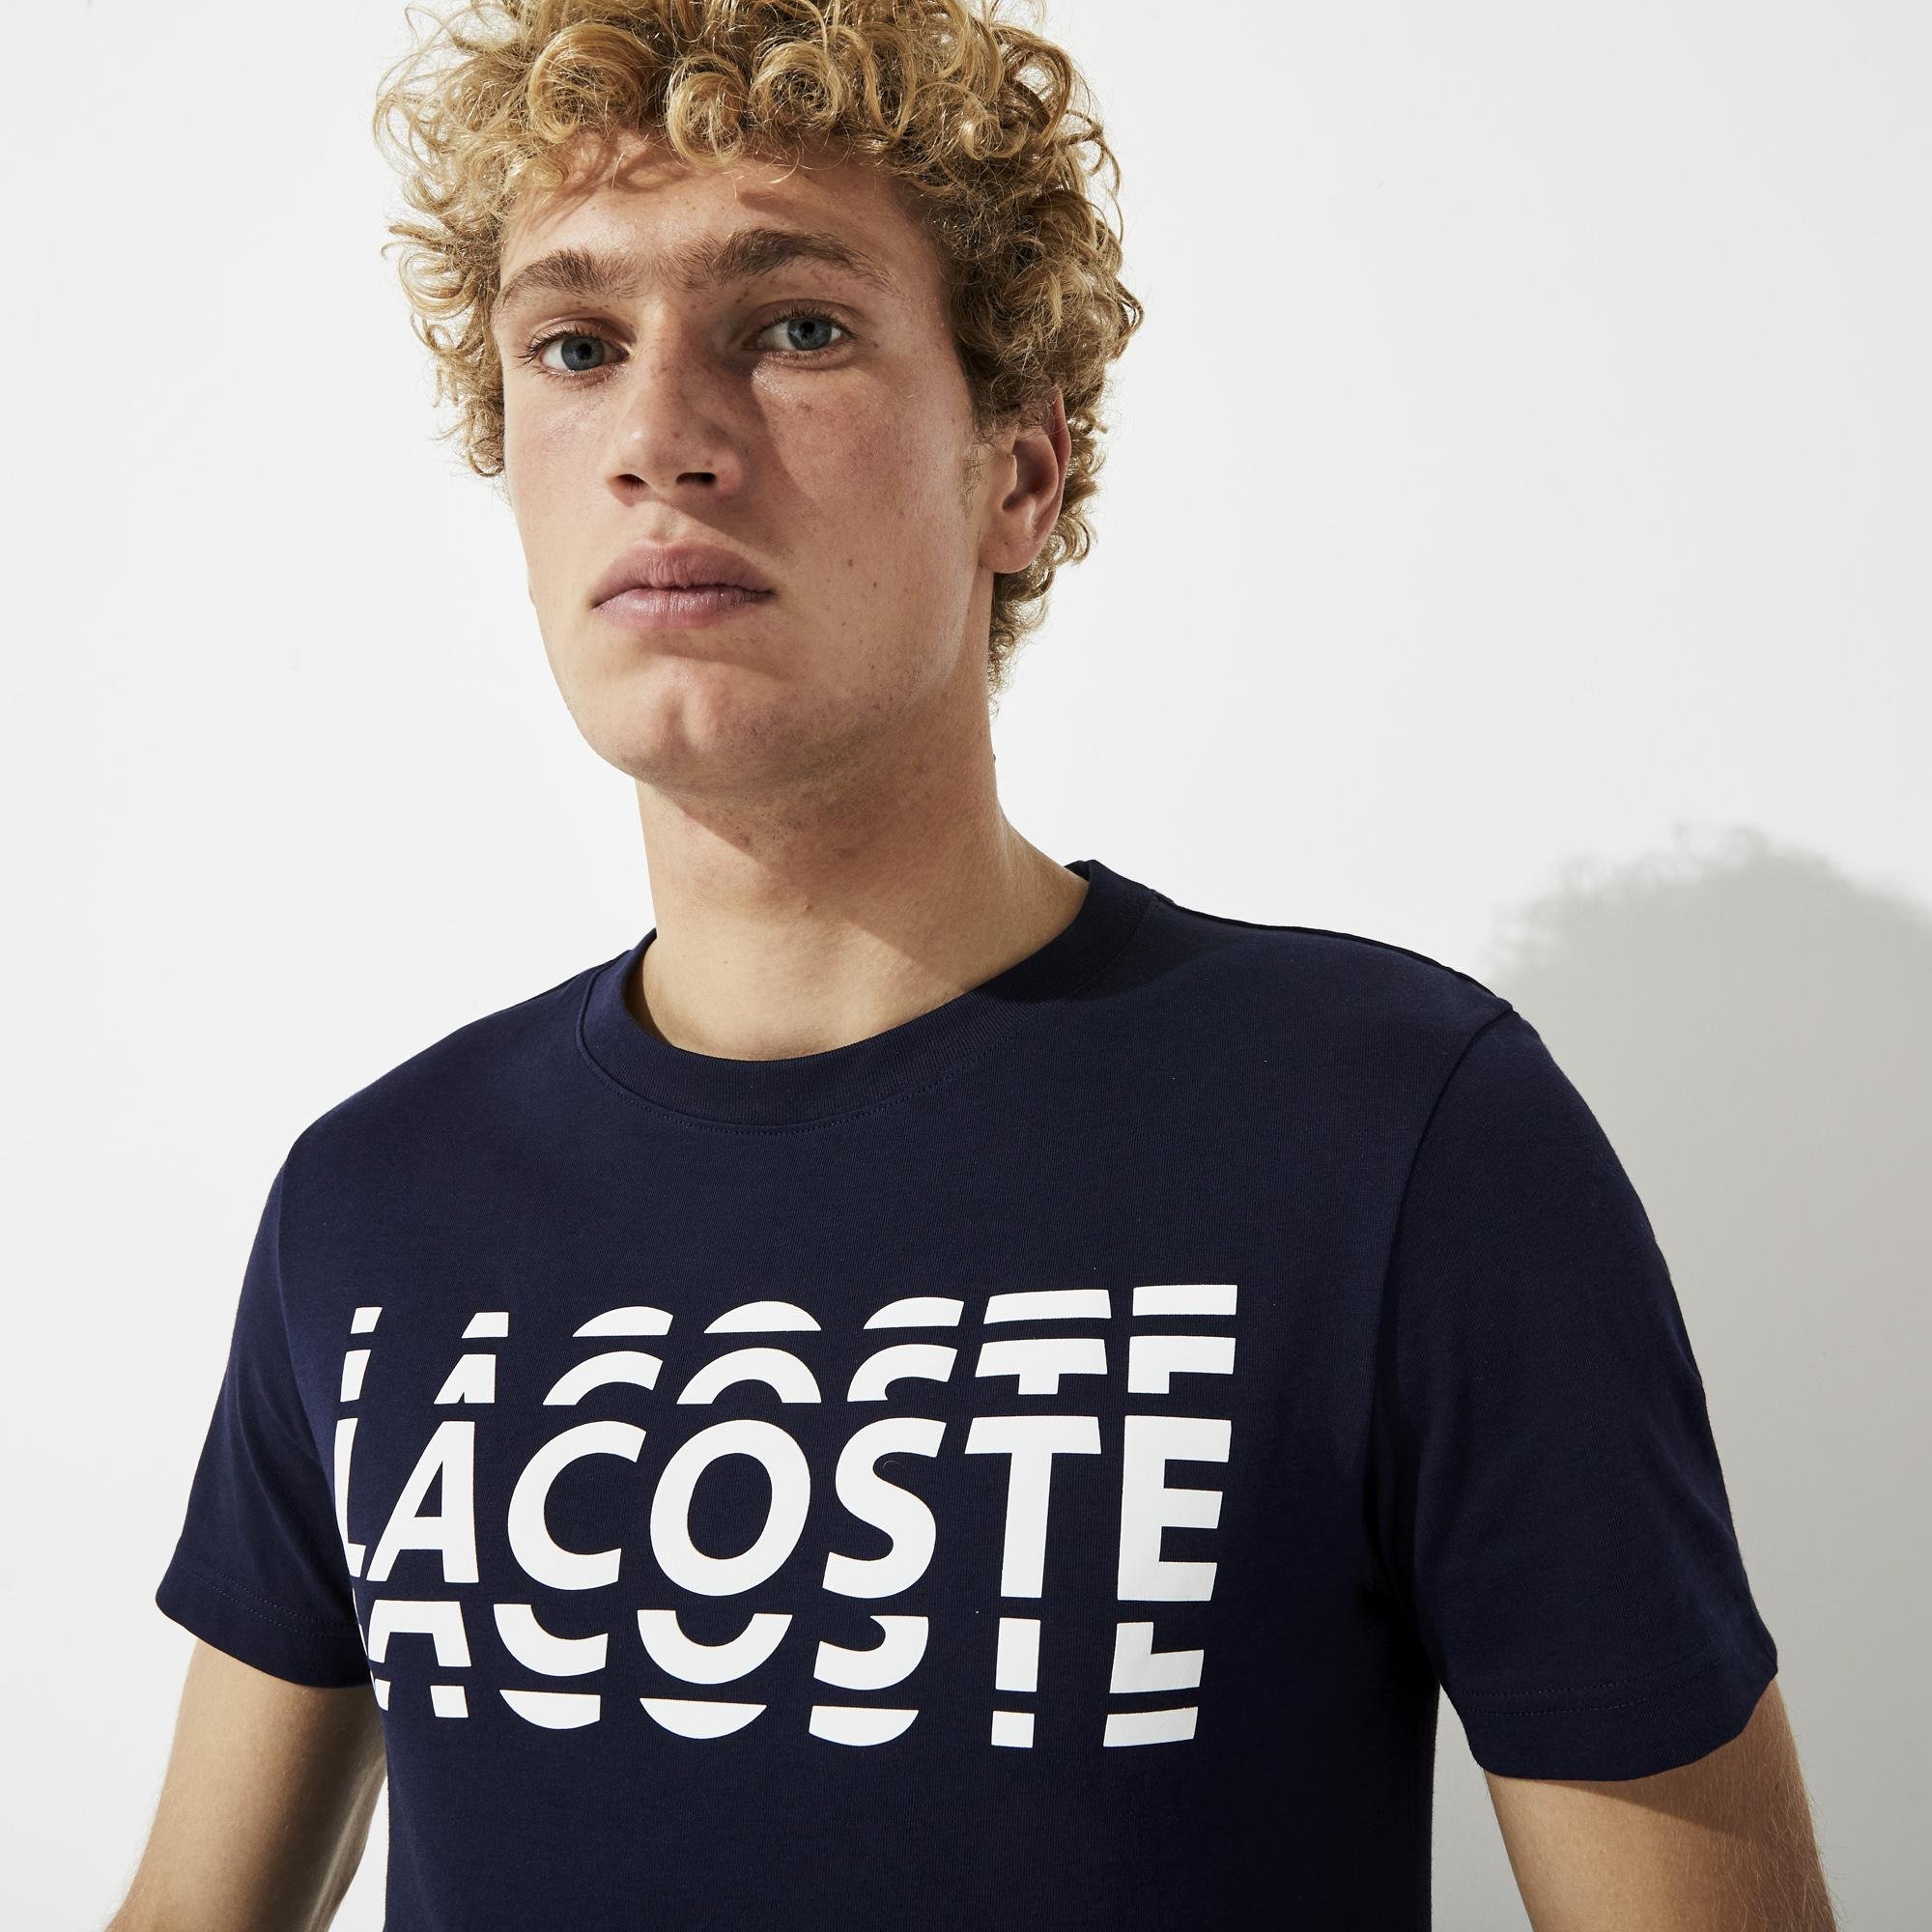 Lacoste Men's T-Shirt with pattern from the mixture cotton